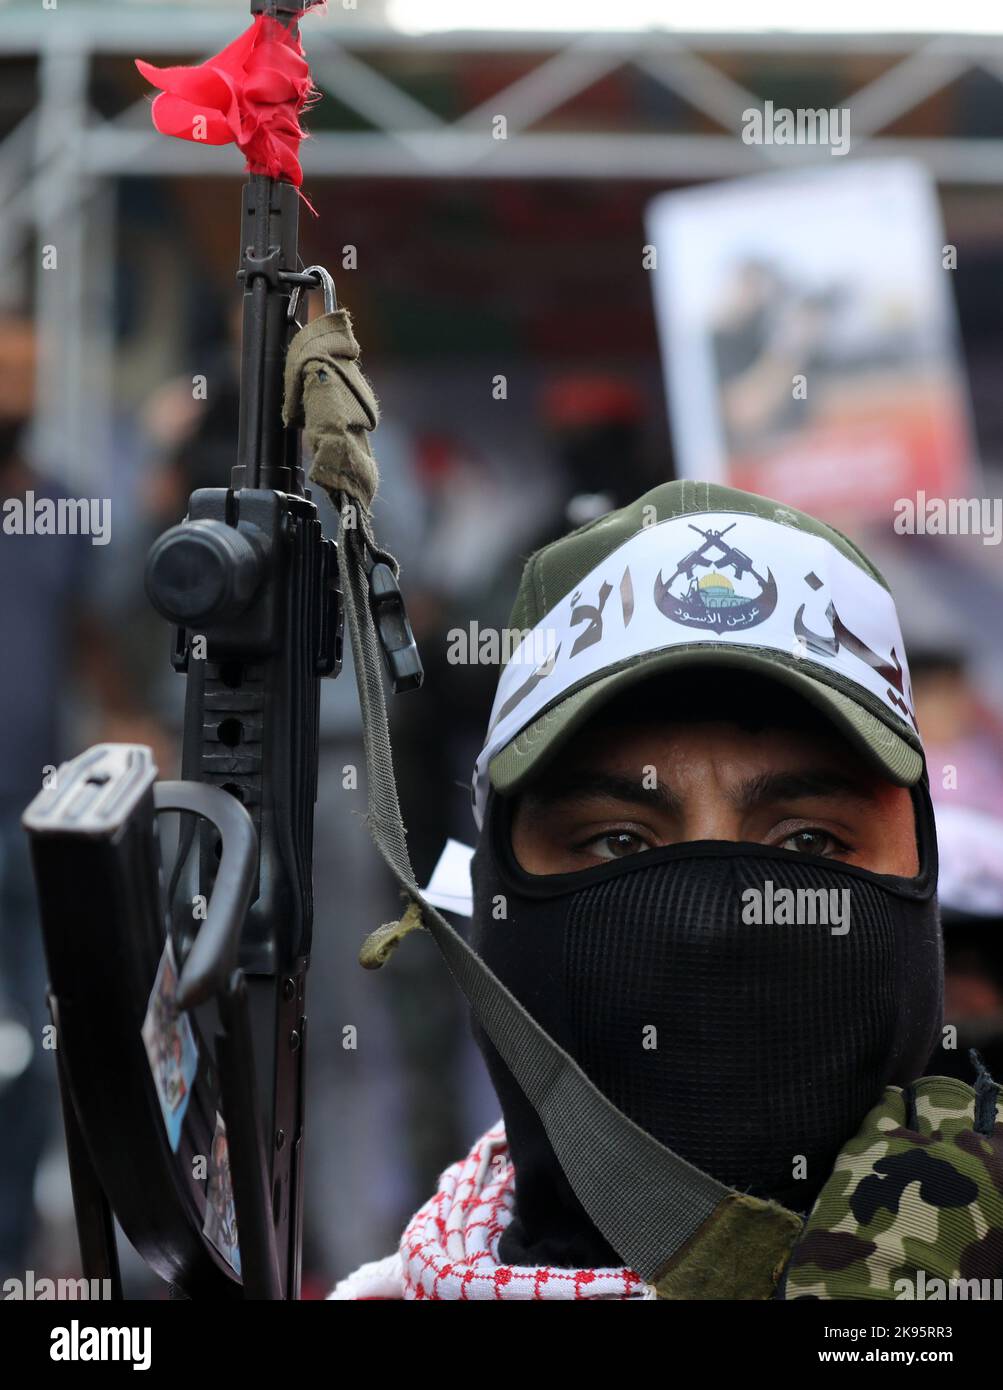 Gaza, Palestine. 25th Oct, 2022. A fighter from the Popular Front for the Liberation of Palestine participates in an anti-Israel military parade in Gaza City. (Photo by Yousef Masoud/SOPA Images/Sipa USA) Credit: Sipa USA/Alamy Live News Stock Photo